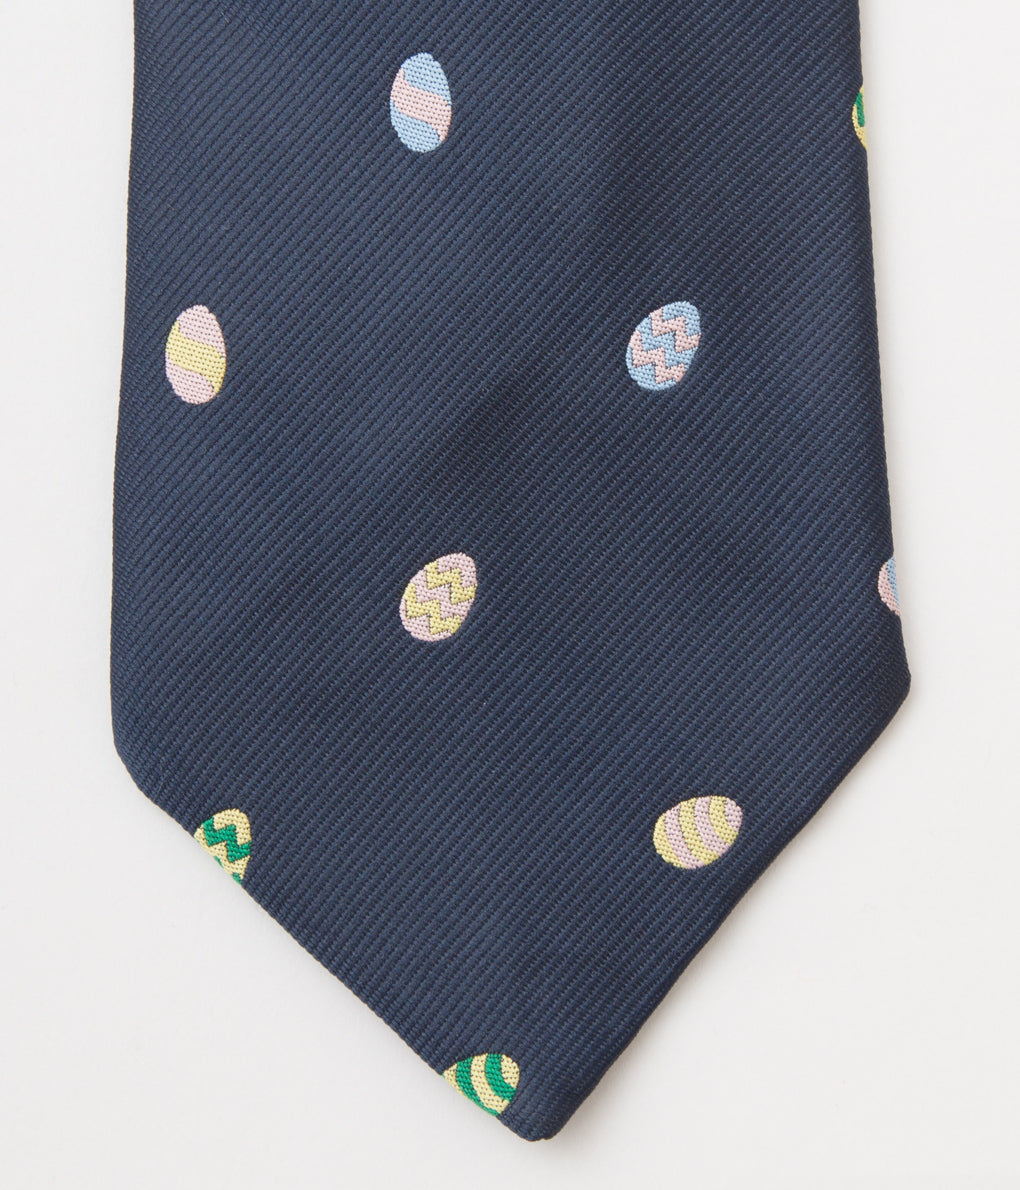 FROM USA "O'CONELL LUCAS-CHELF EMBROIDERED TIE EASTER EGG"(NAVY)